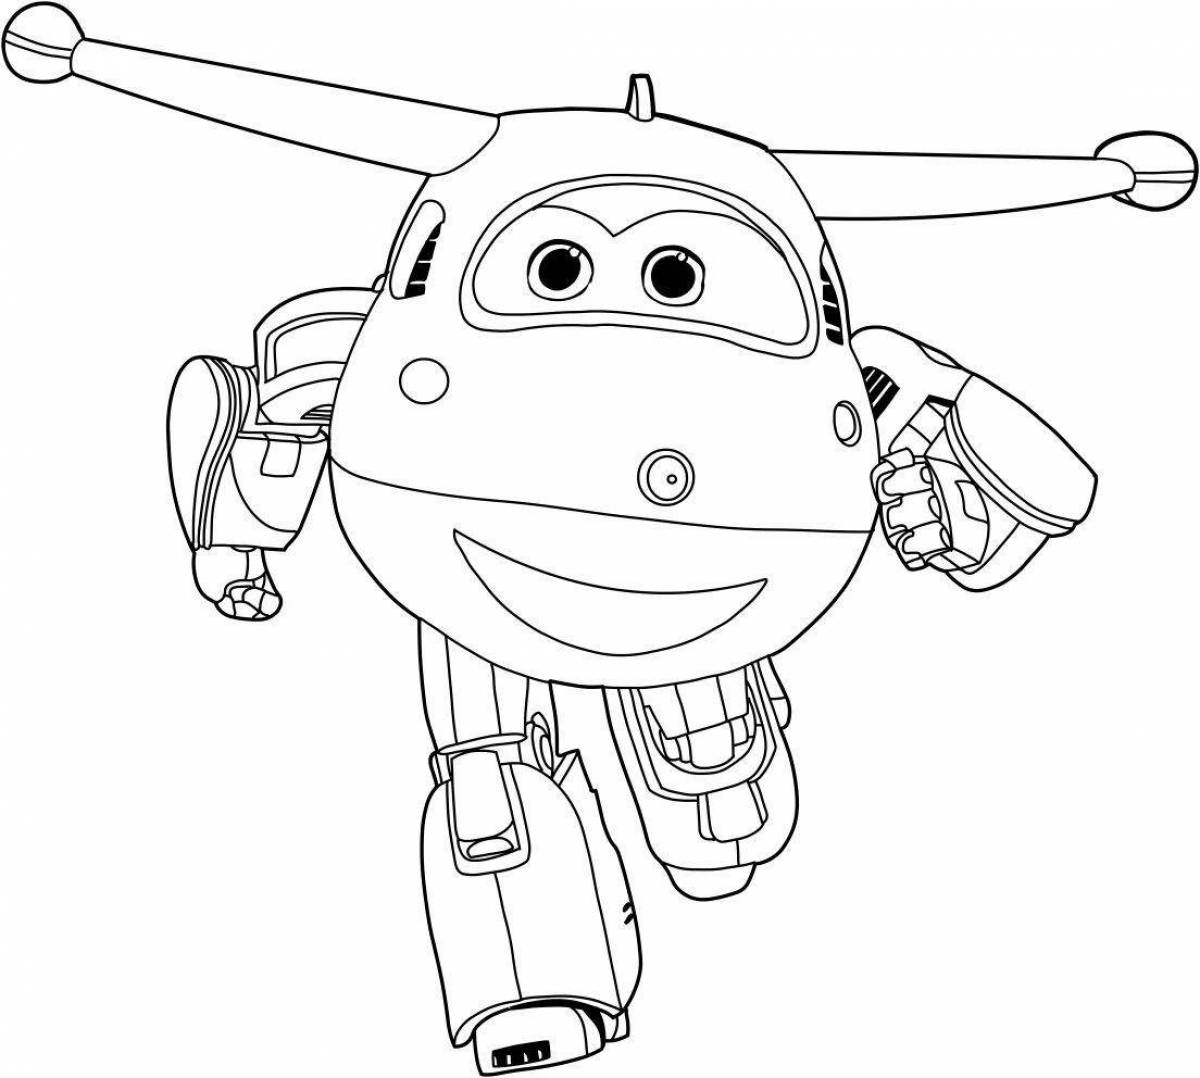 Coloring page marvelous super wings